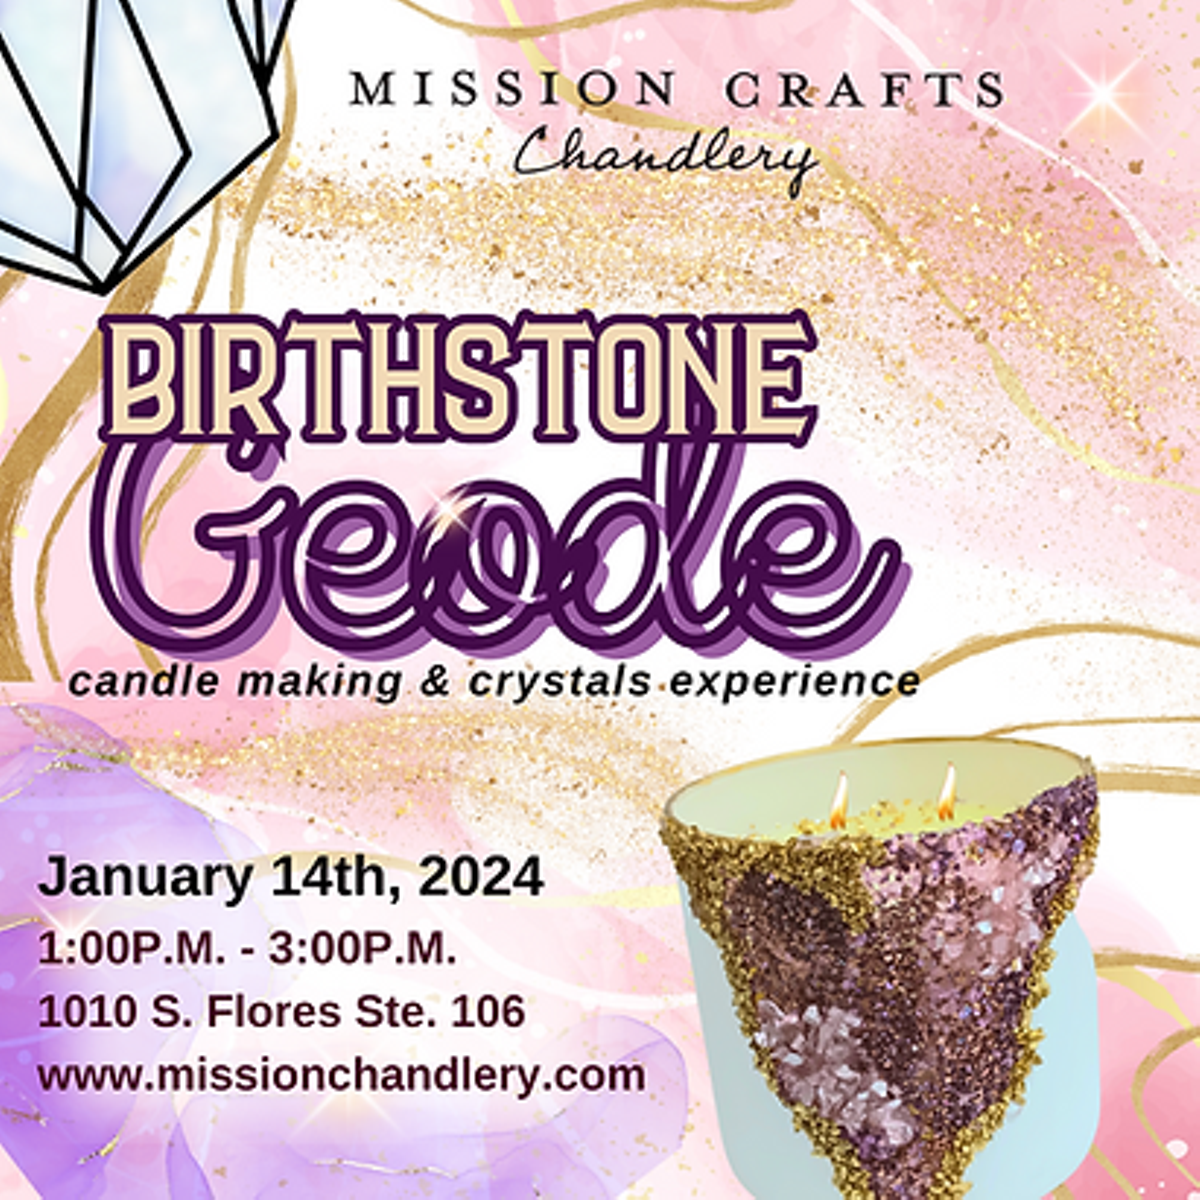 Birthstone Geode Candle Making Experience, Mission Crafts Chandlery, Art,  Special Events, Workshop